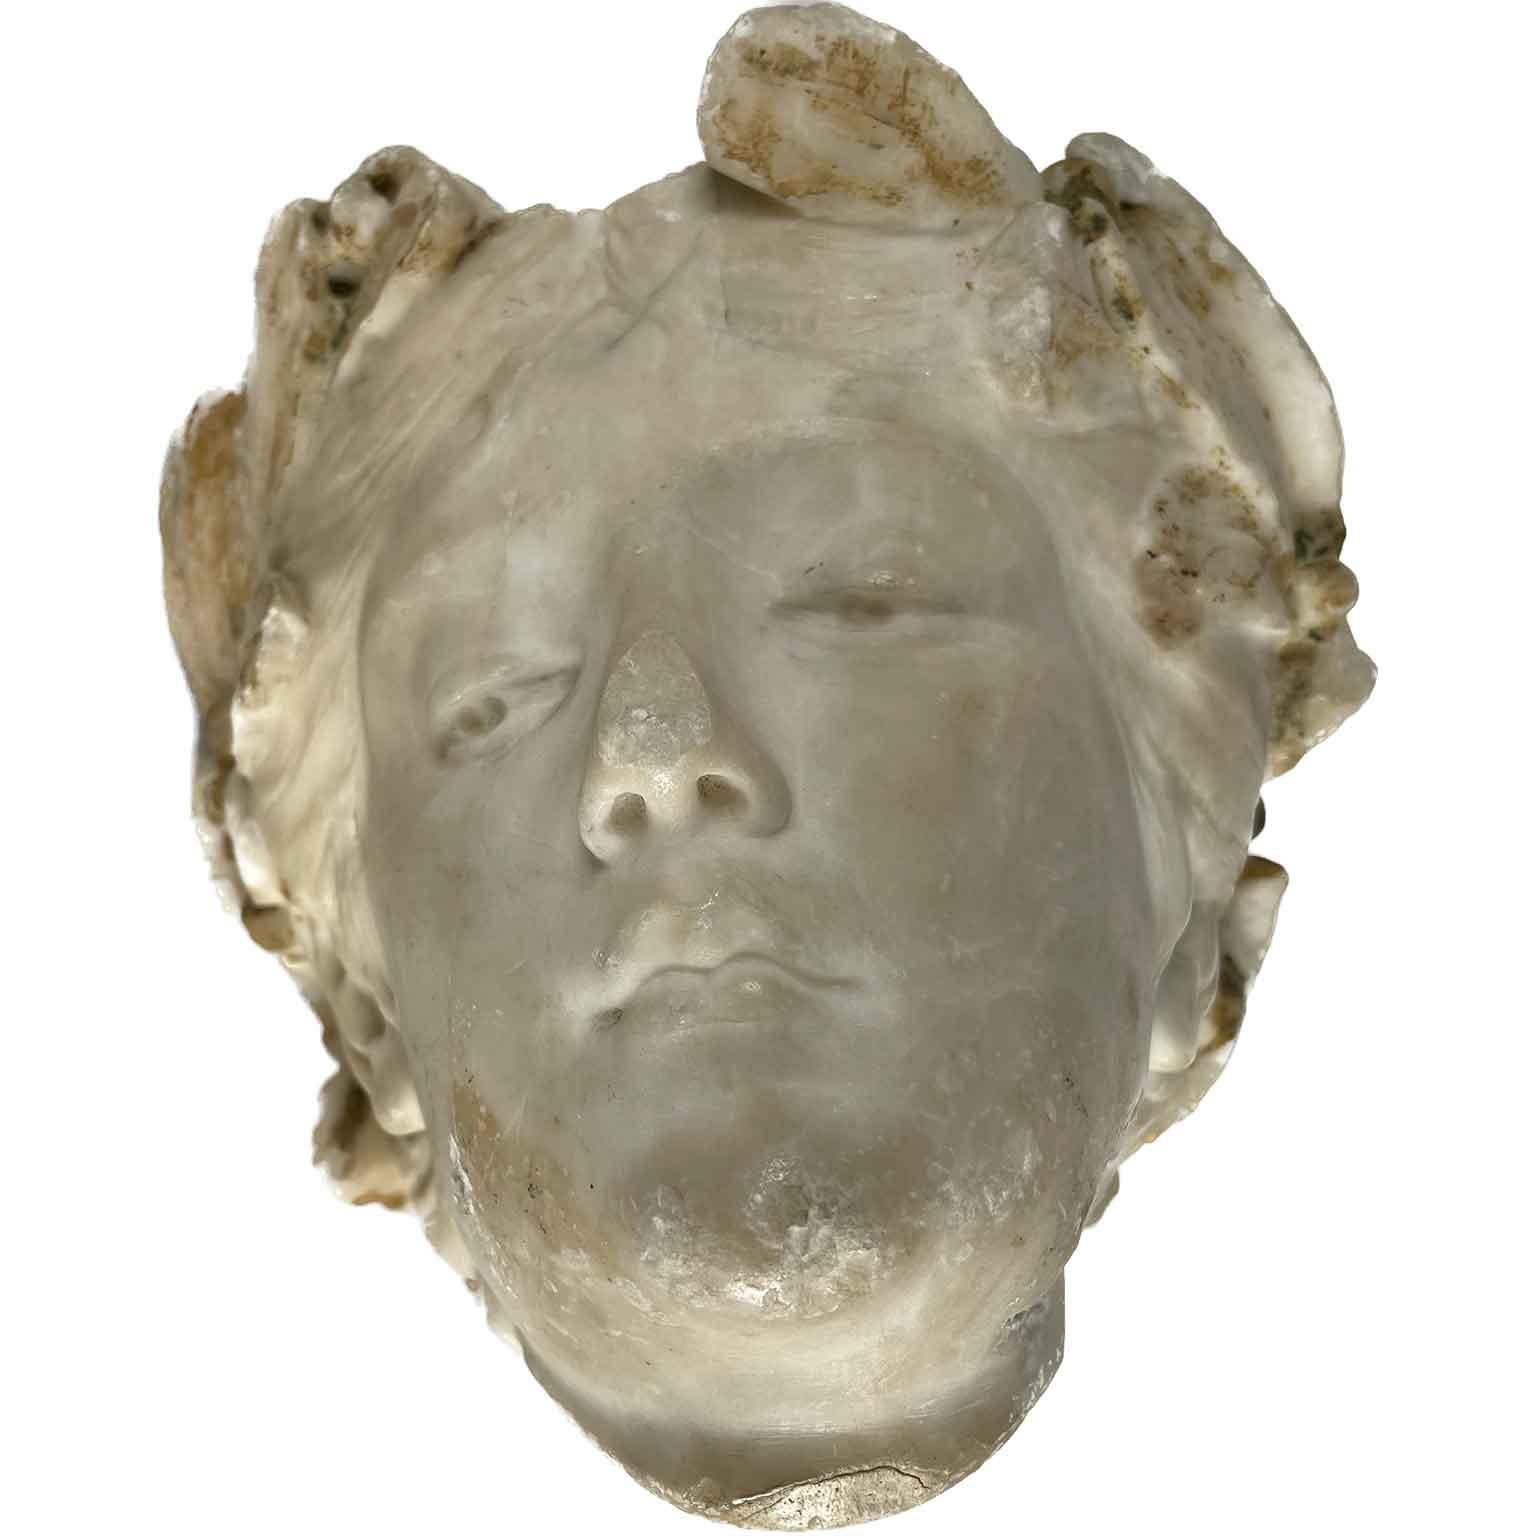 Early 20th Century Italian Alabaster Female Head Garden Statue Fragment of Classical Roman Greek Style. Carved alabaster head of  a woman,  an ideal female character, probably a deity,  the face of a girl with long hair gathered and tied on the top